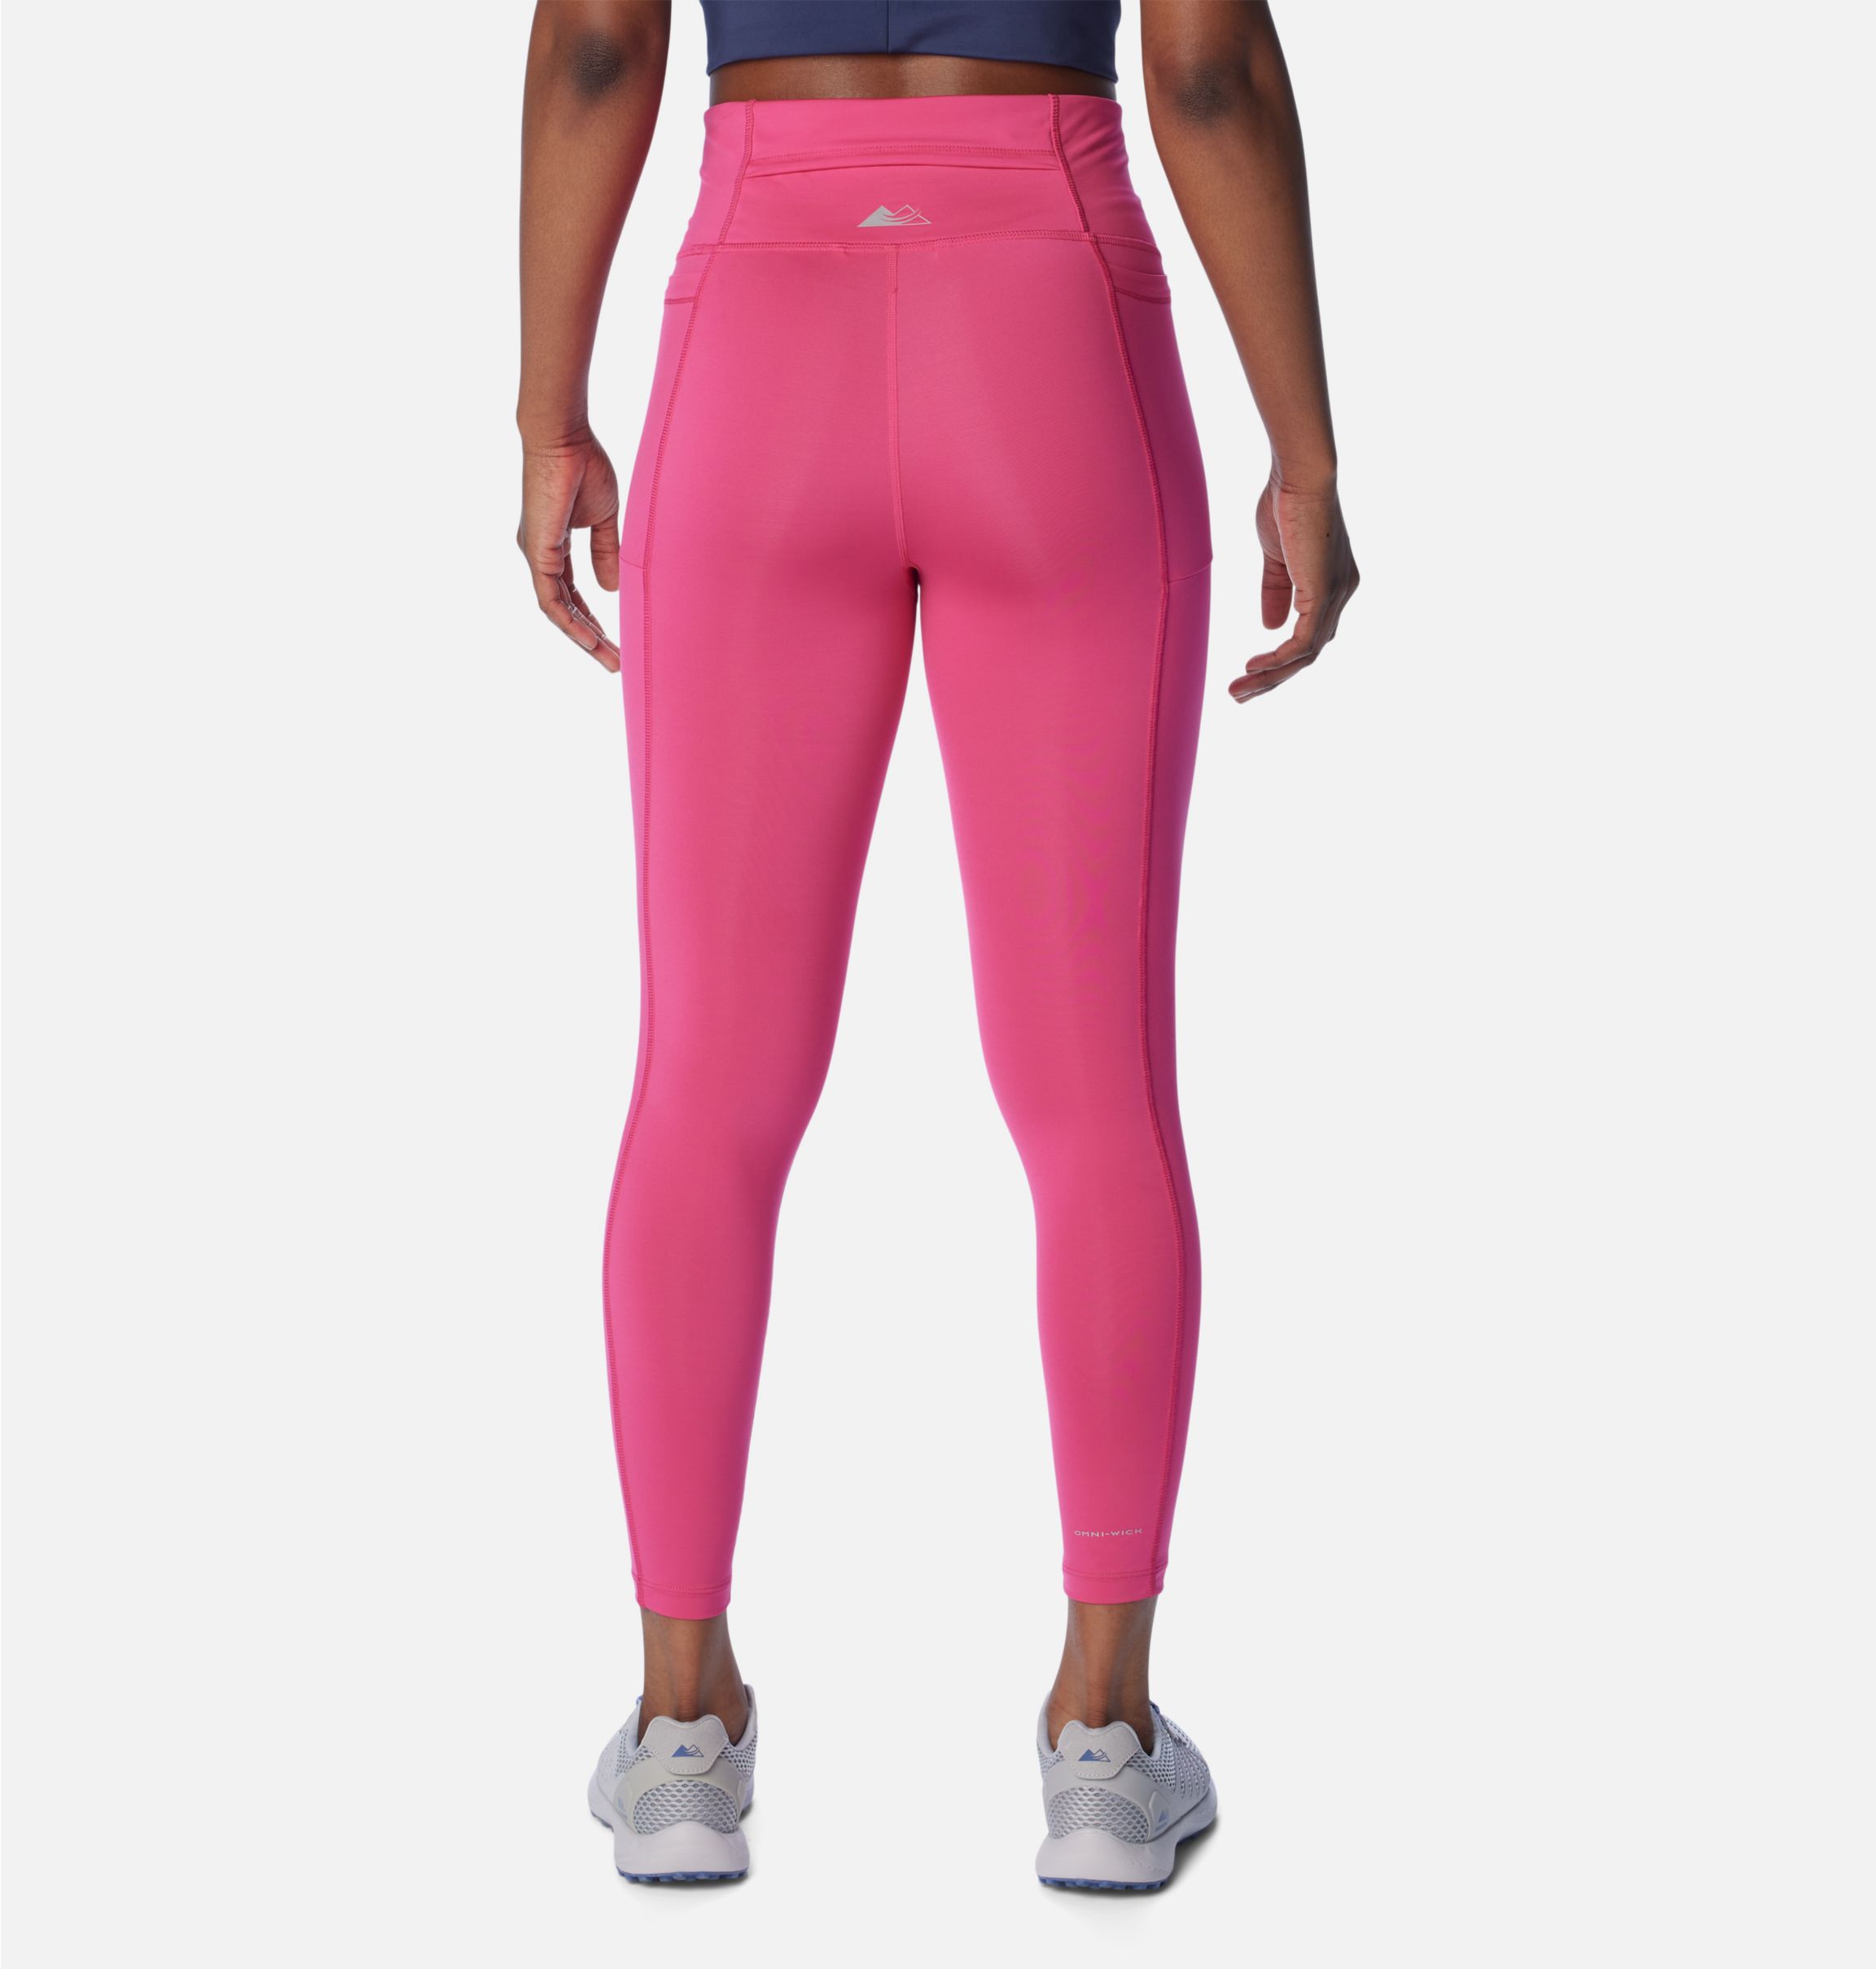 Women's Endless Trail™ Running Tights